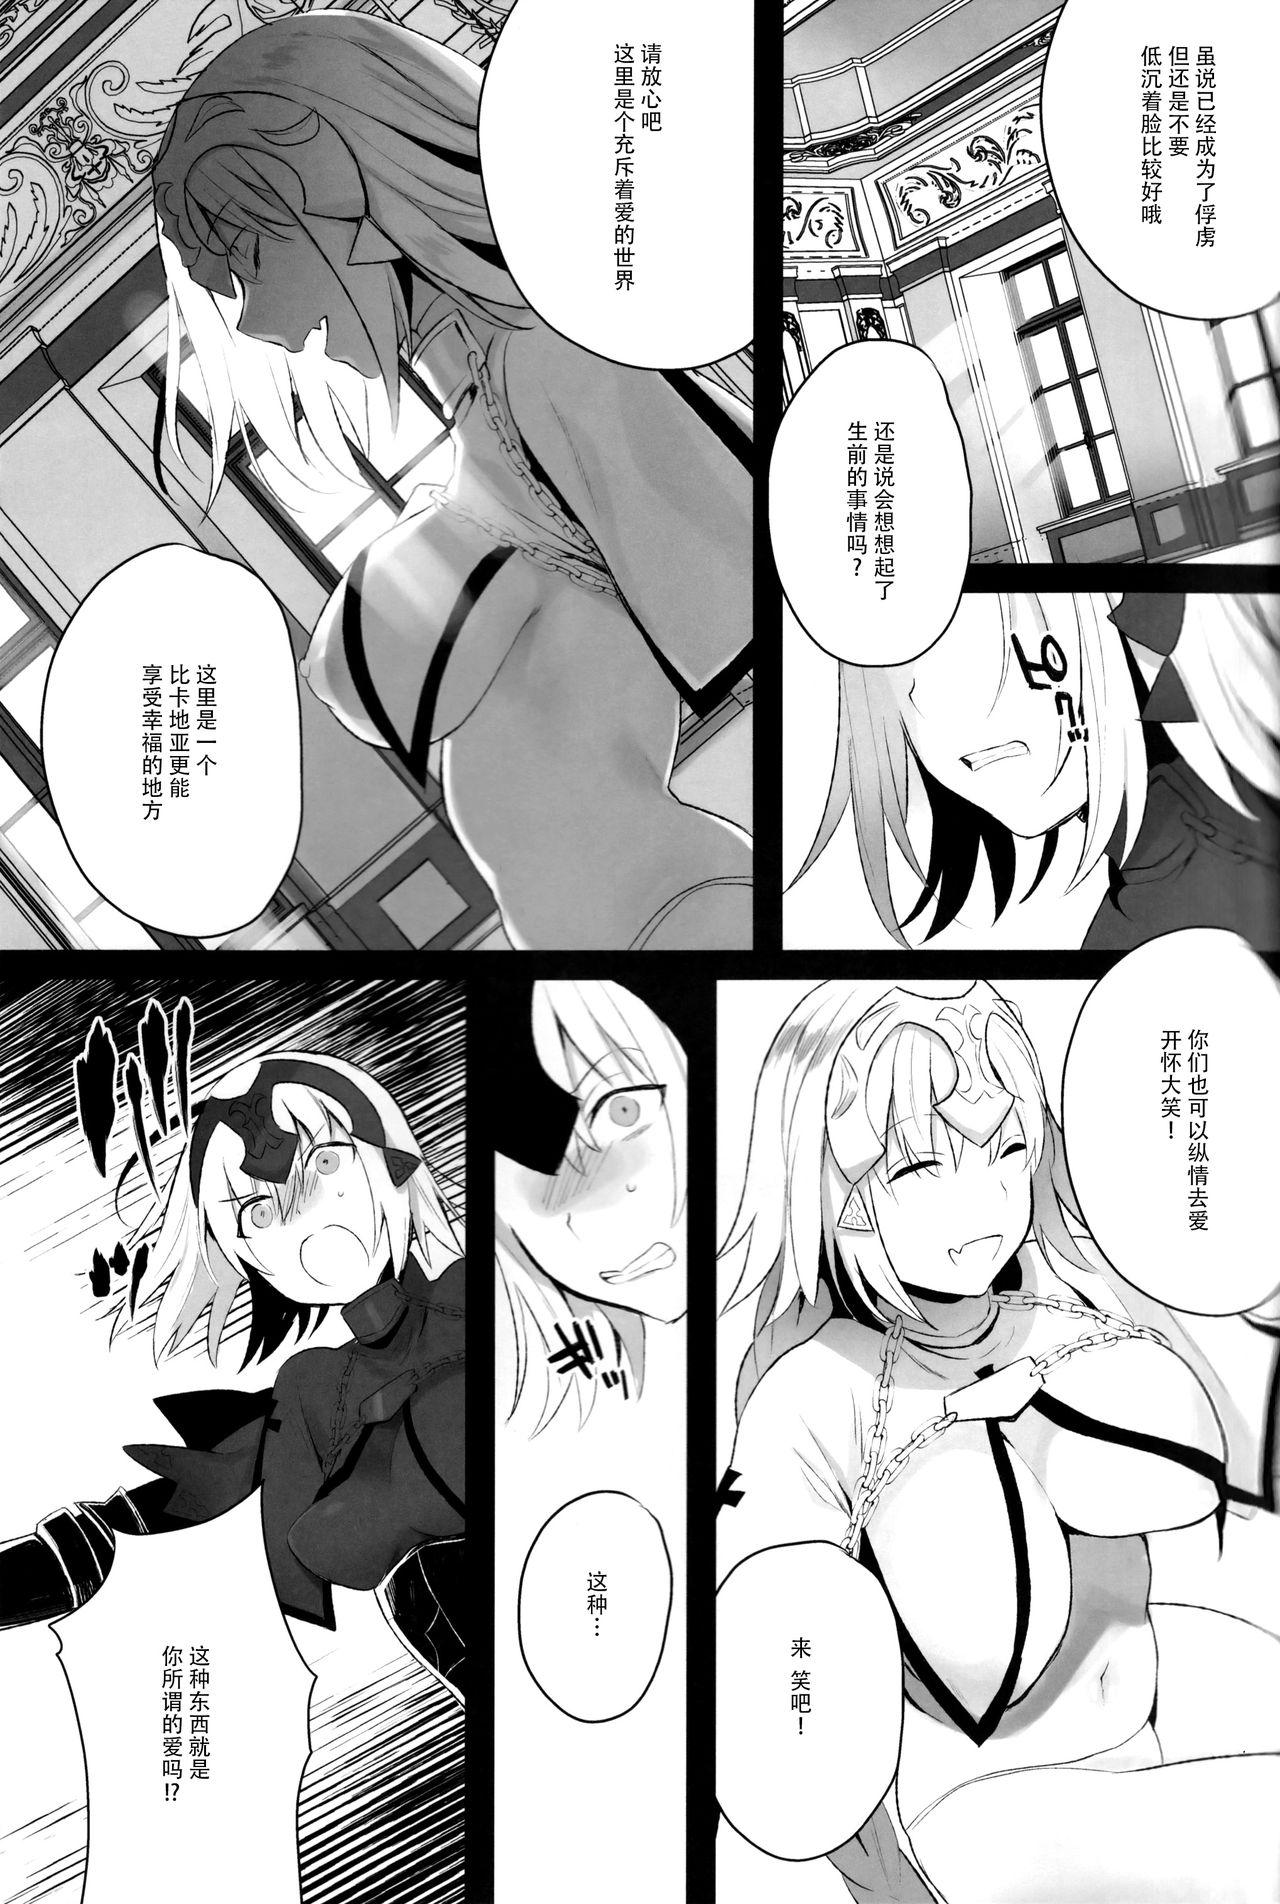 Older Mad Love/Pseudepigrapha - Fate grand order Porn Star - Page 7